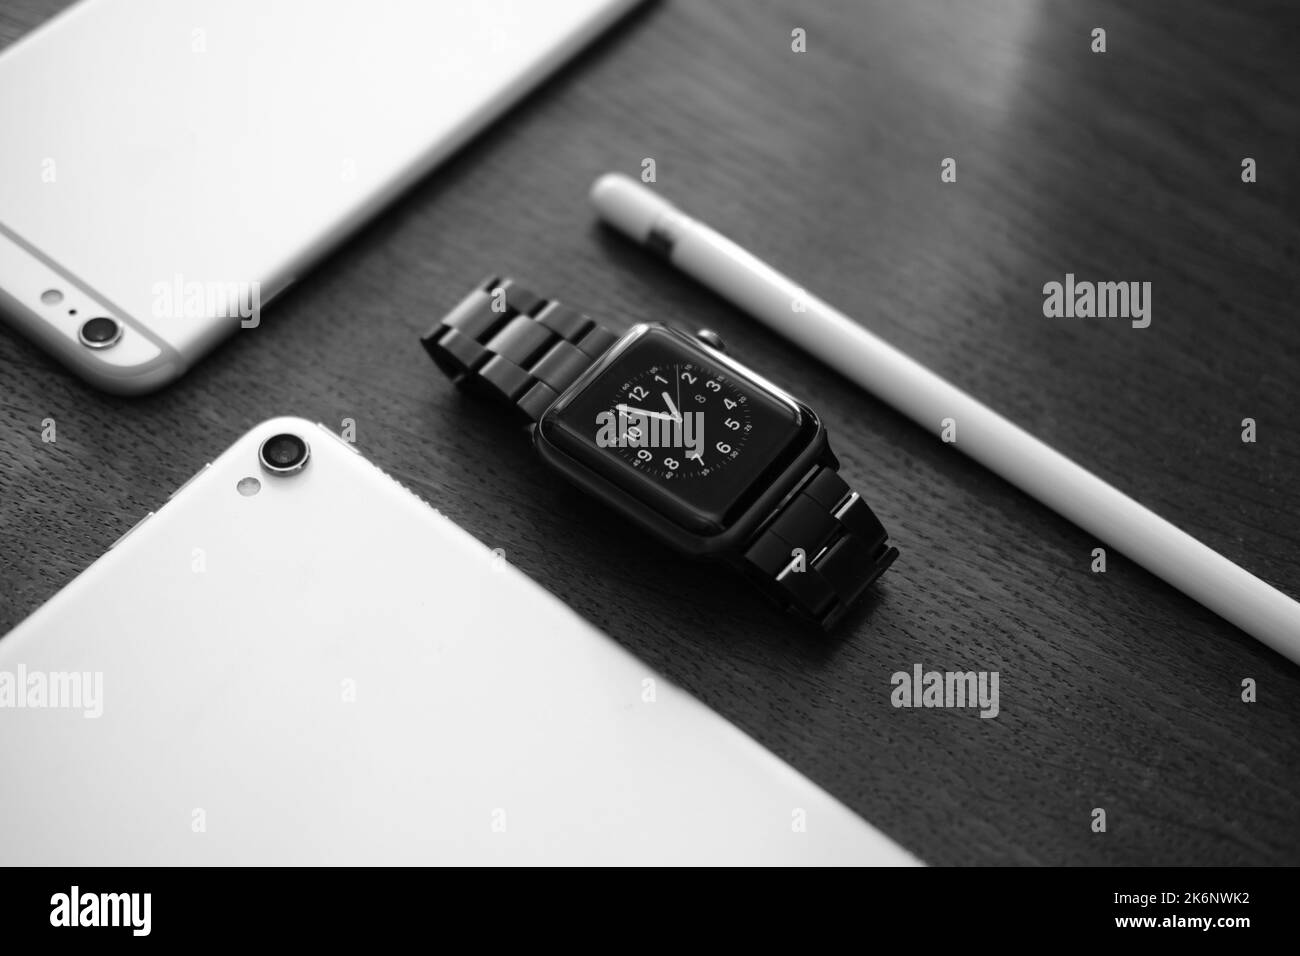 Premium high tech made in the silicon valley, in this image as part of a clean desk work setup, helping to boost productivity and creativity Stock Photo